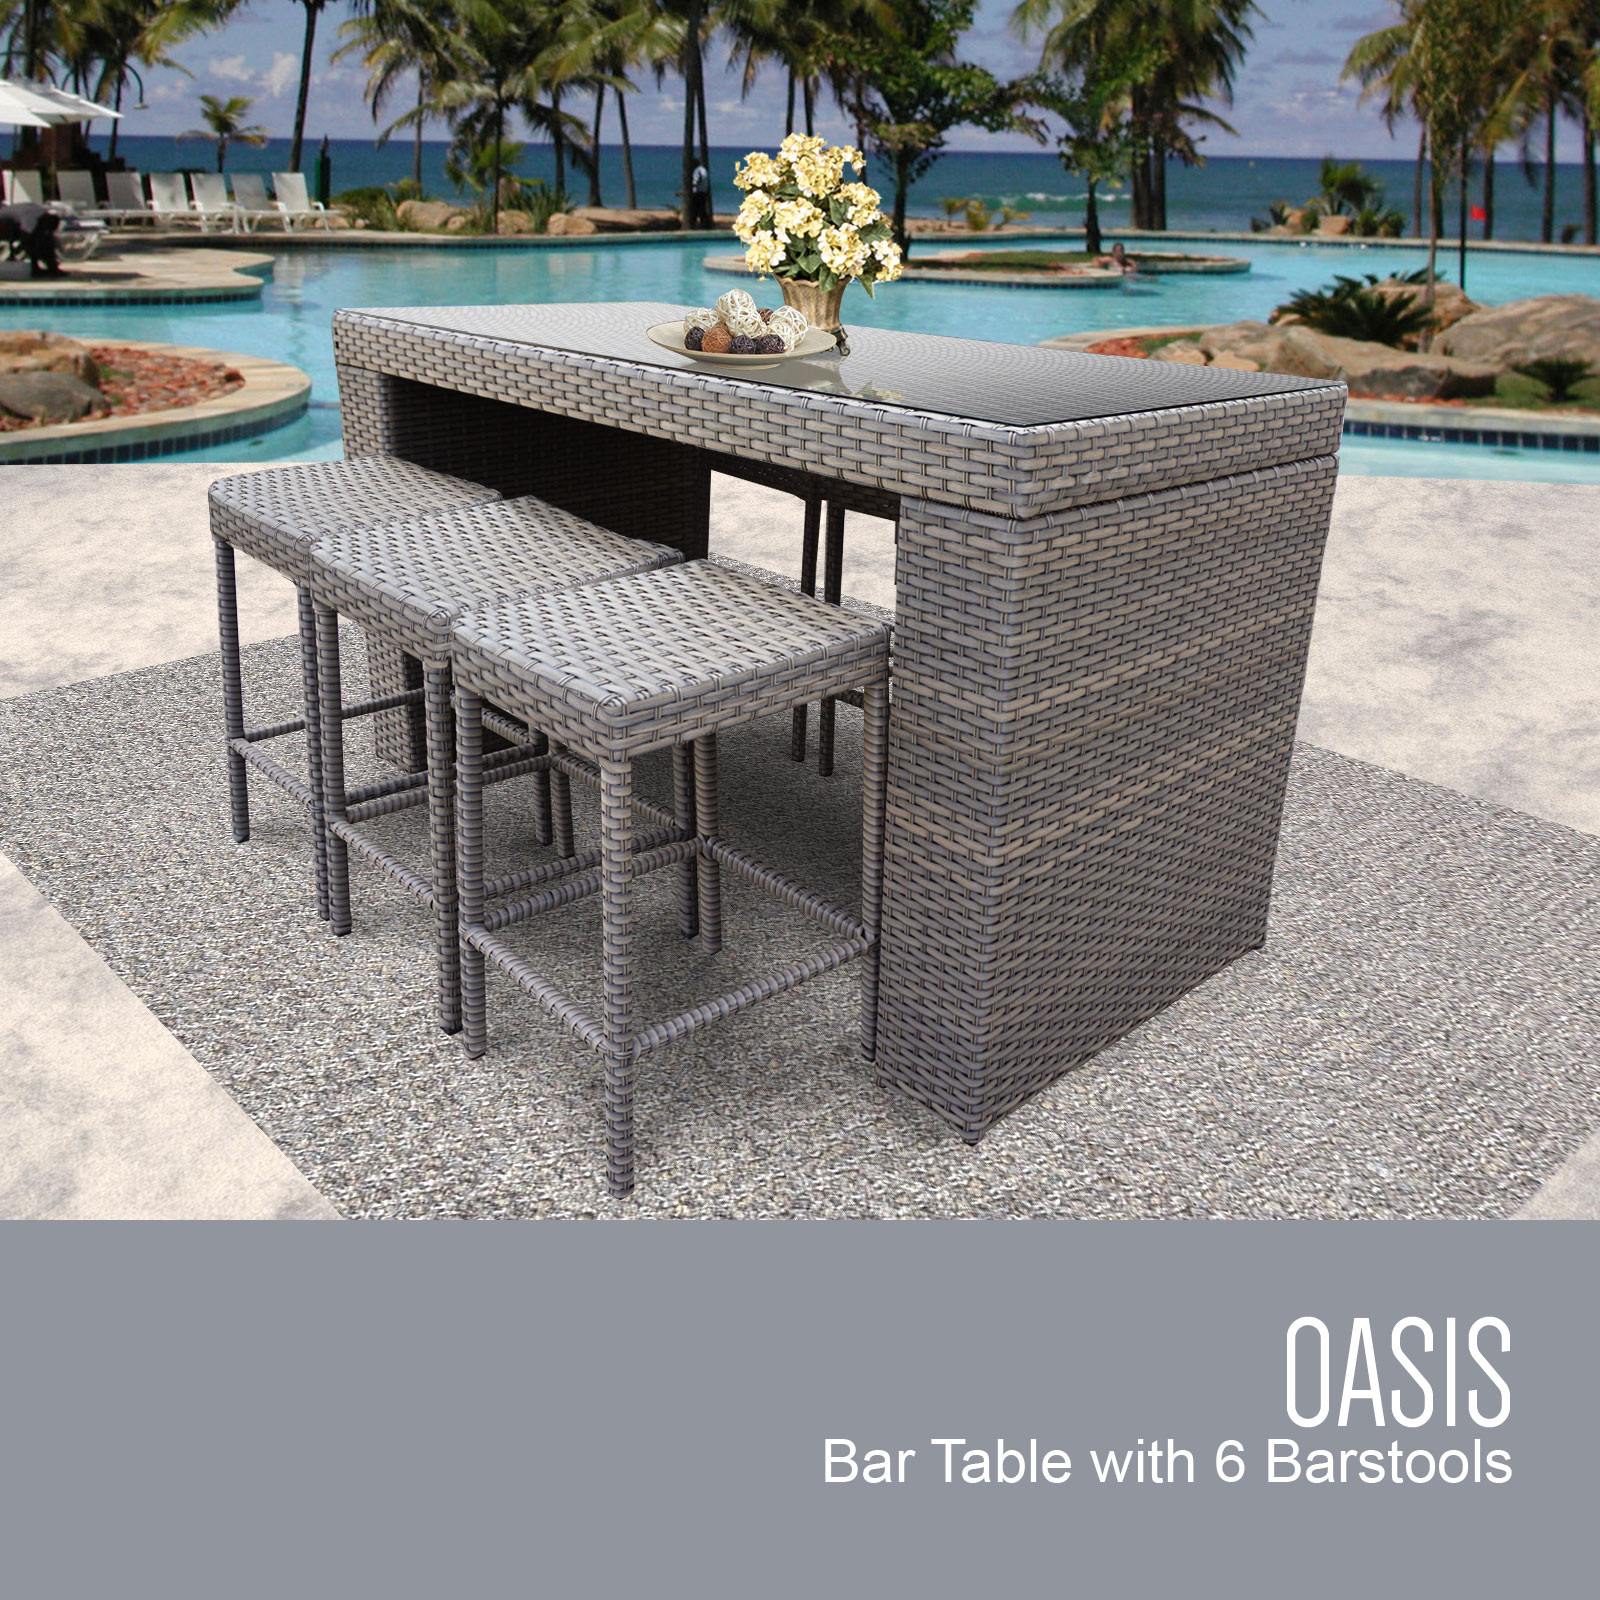 Oasis Bar Table Set With Backless Barstools 7 Piece Outdoor Wicker